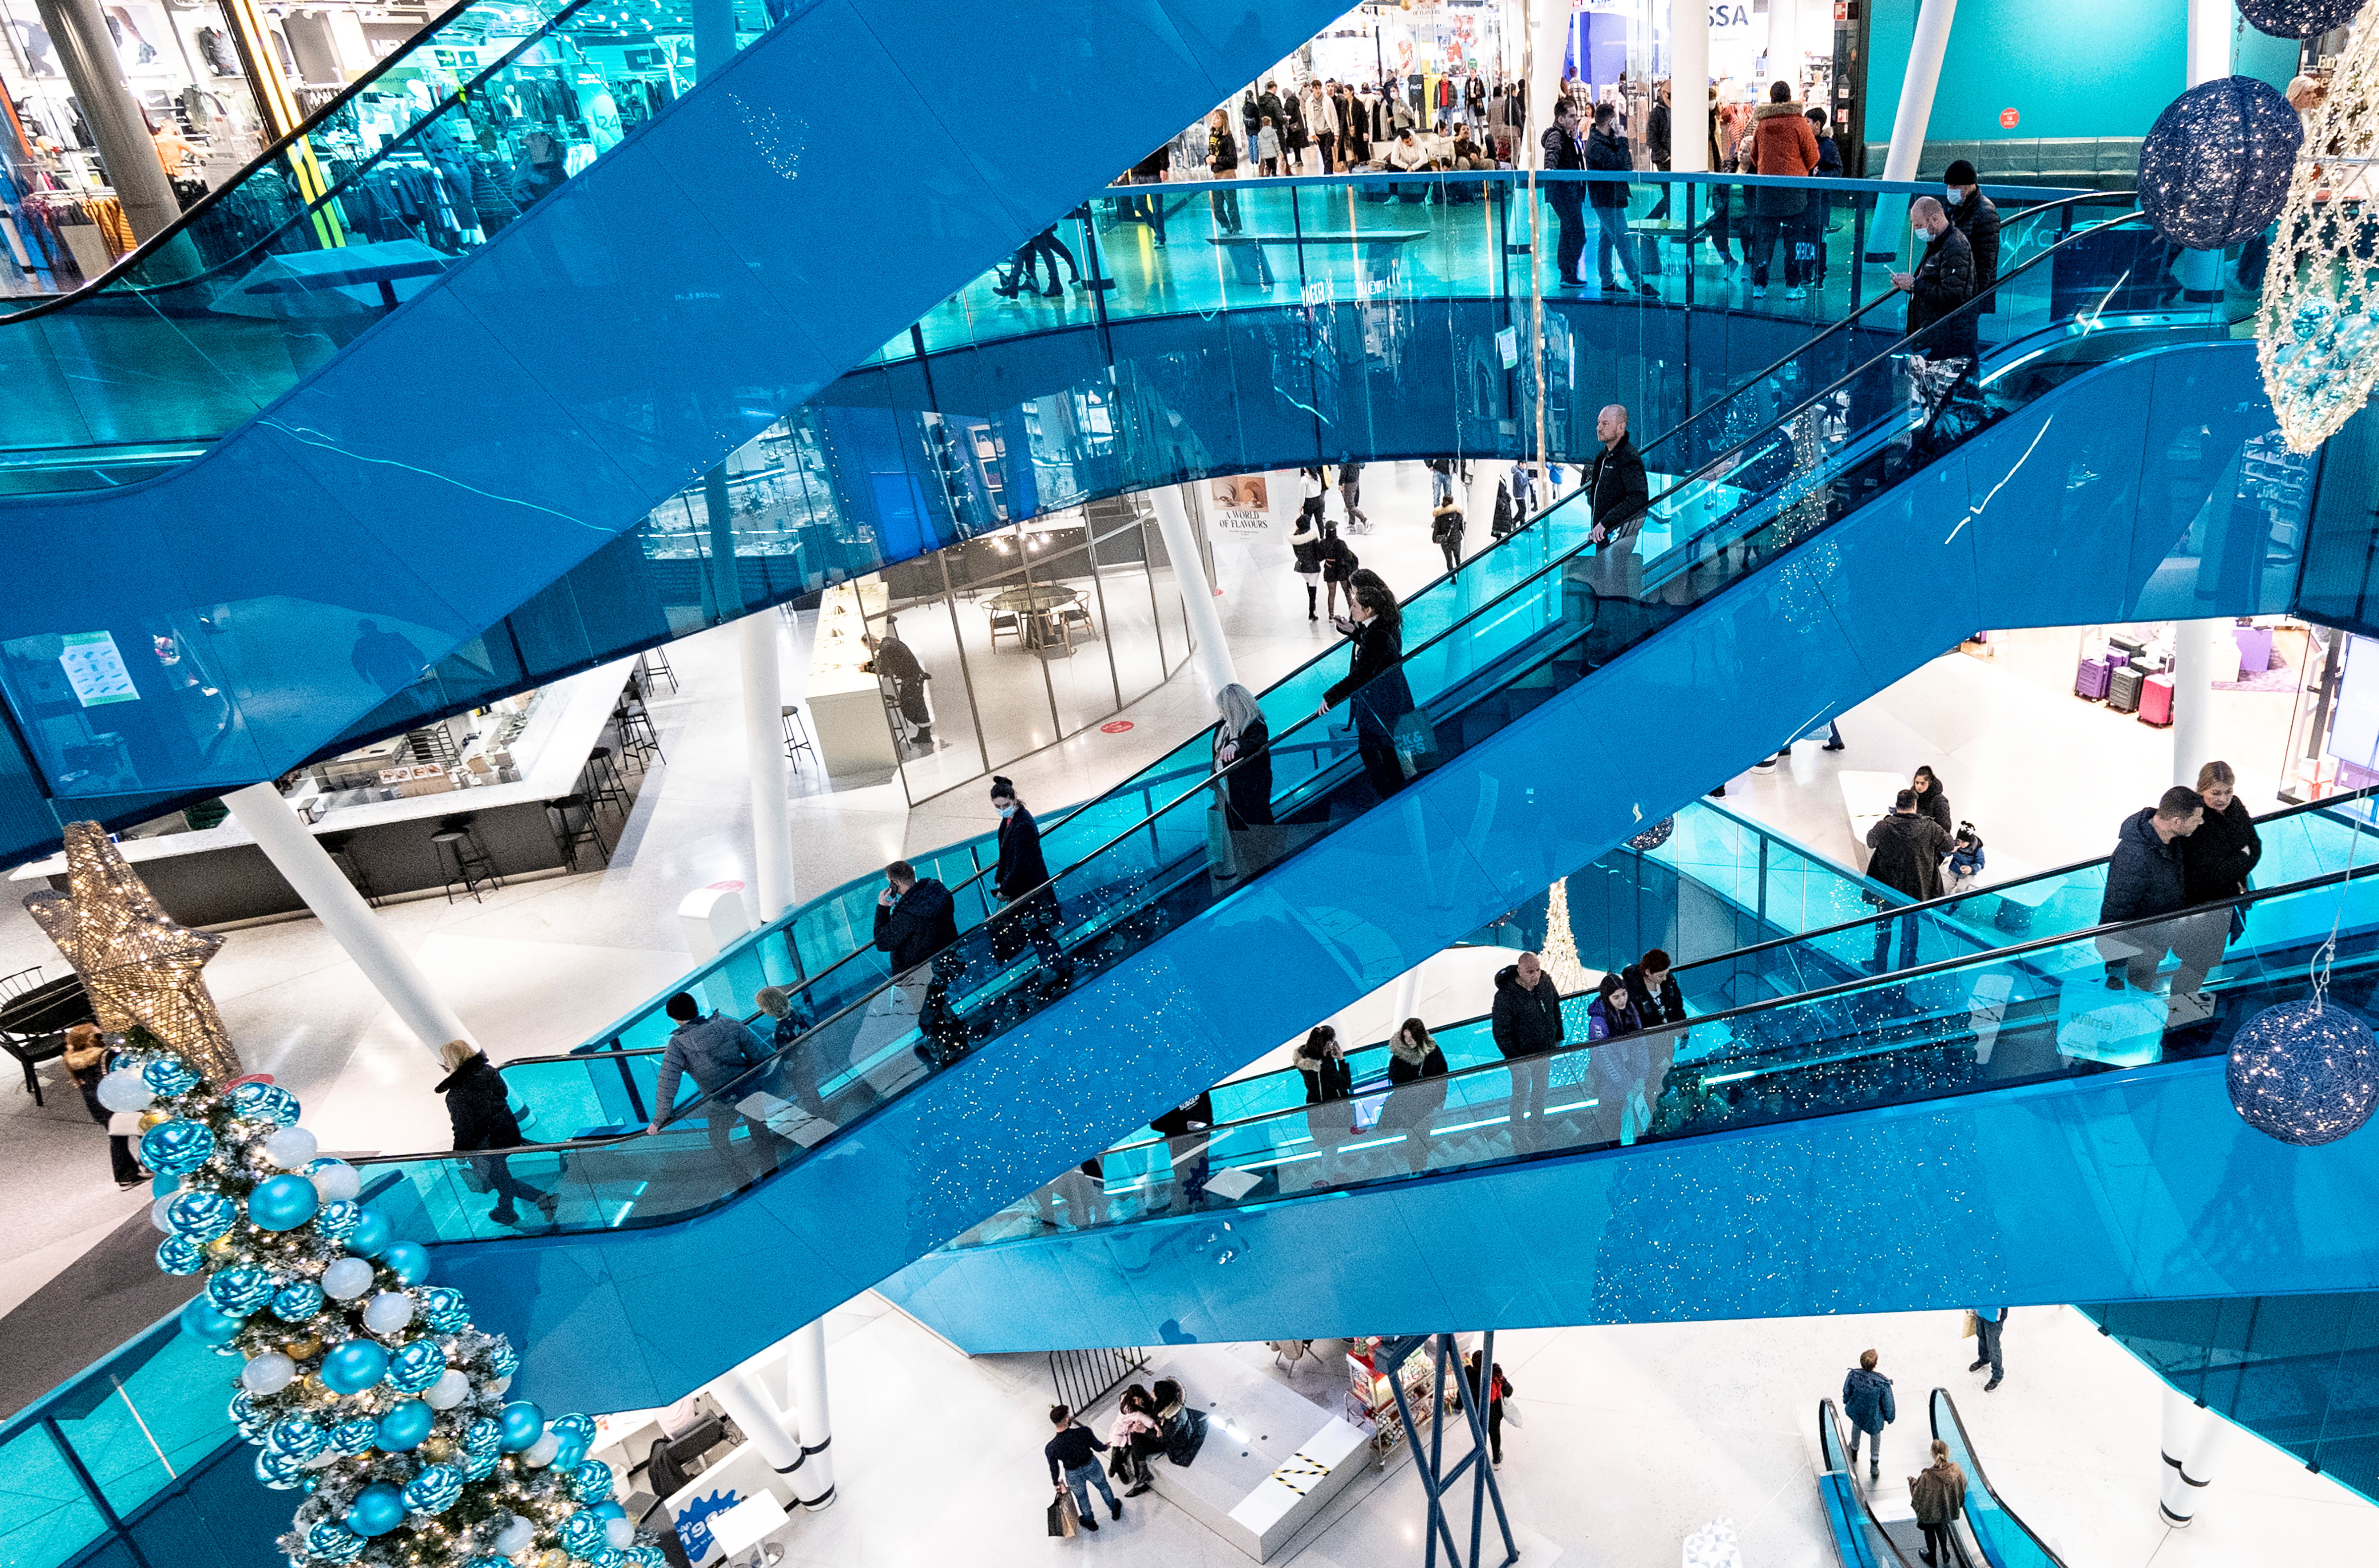 Christmas shoppers maintain social distancing as they ride on escalators in Emporia shopping centre in Malmo